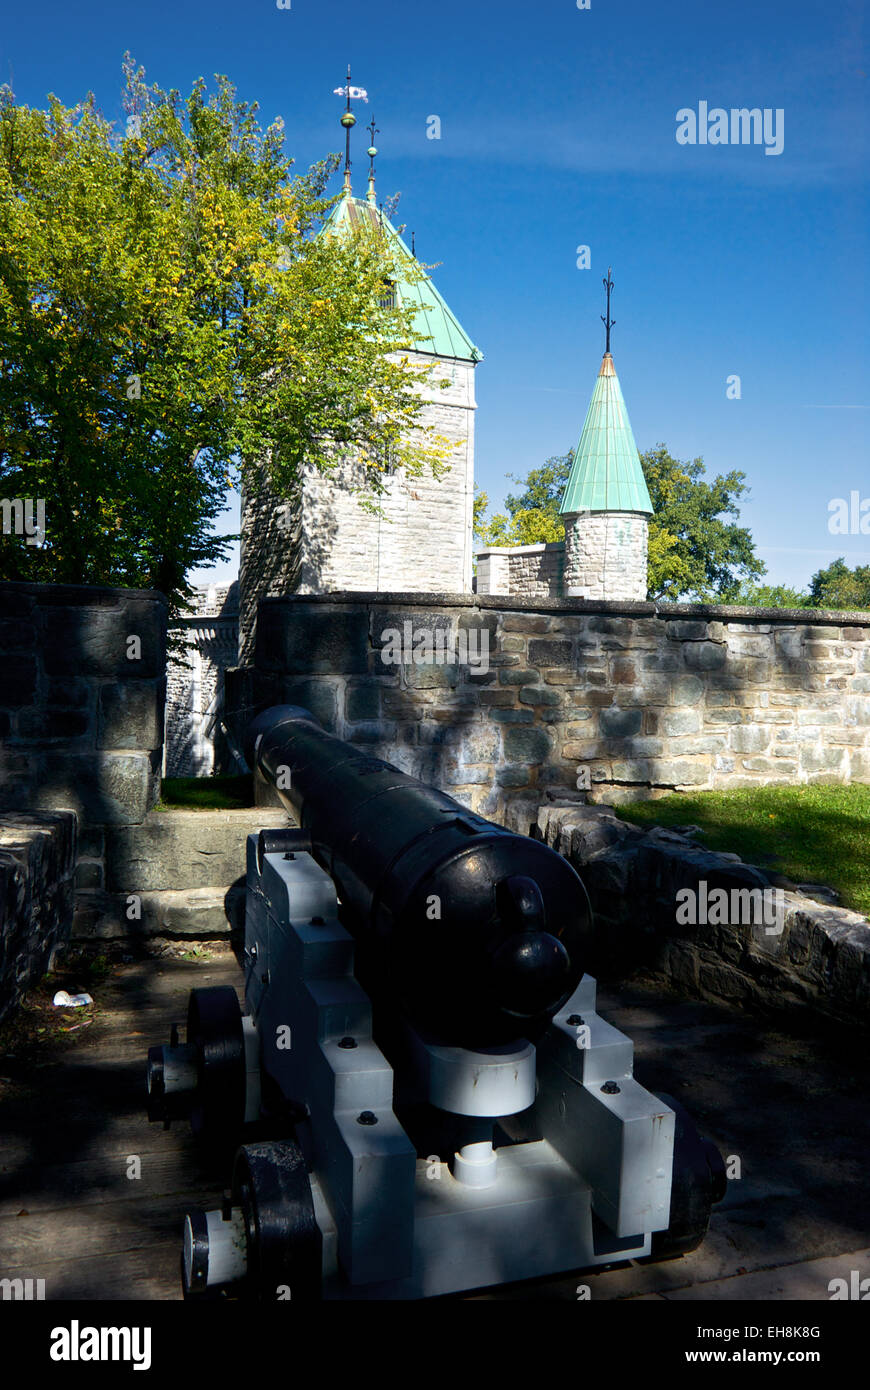 Cannon & stone watch towers on Saint-Louis gateway into old walled Quebec City Stock Photo